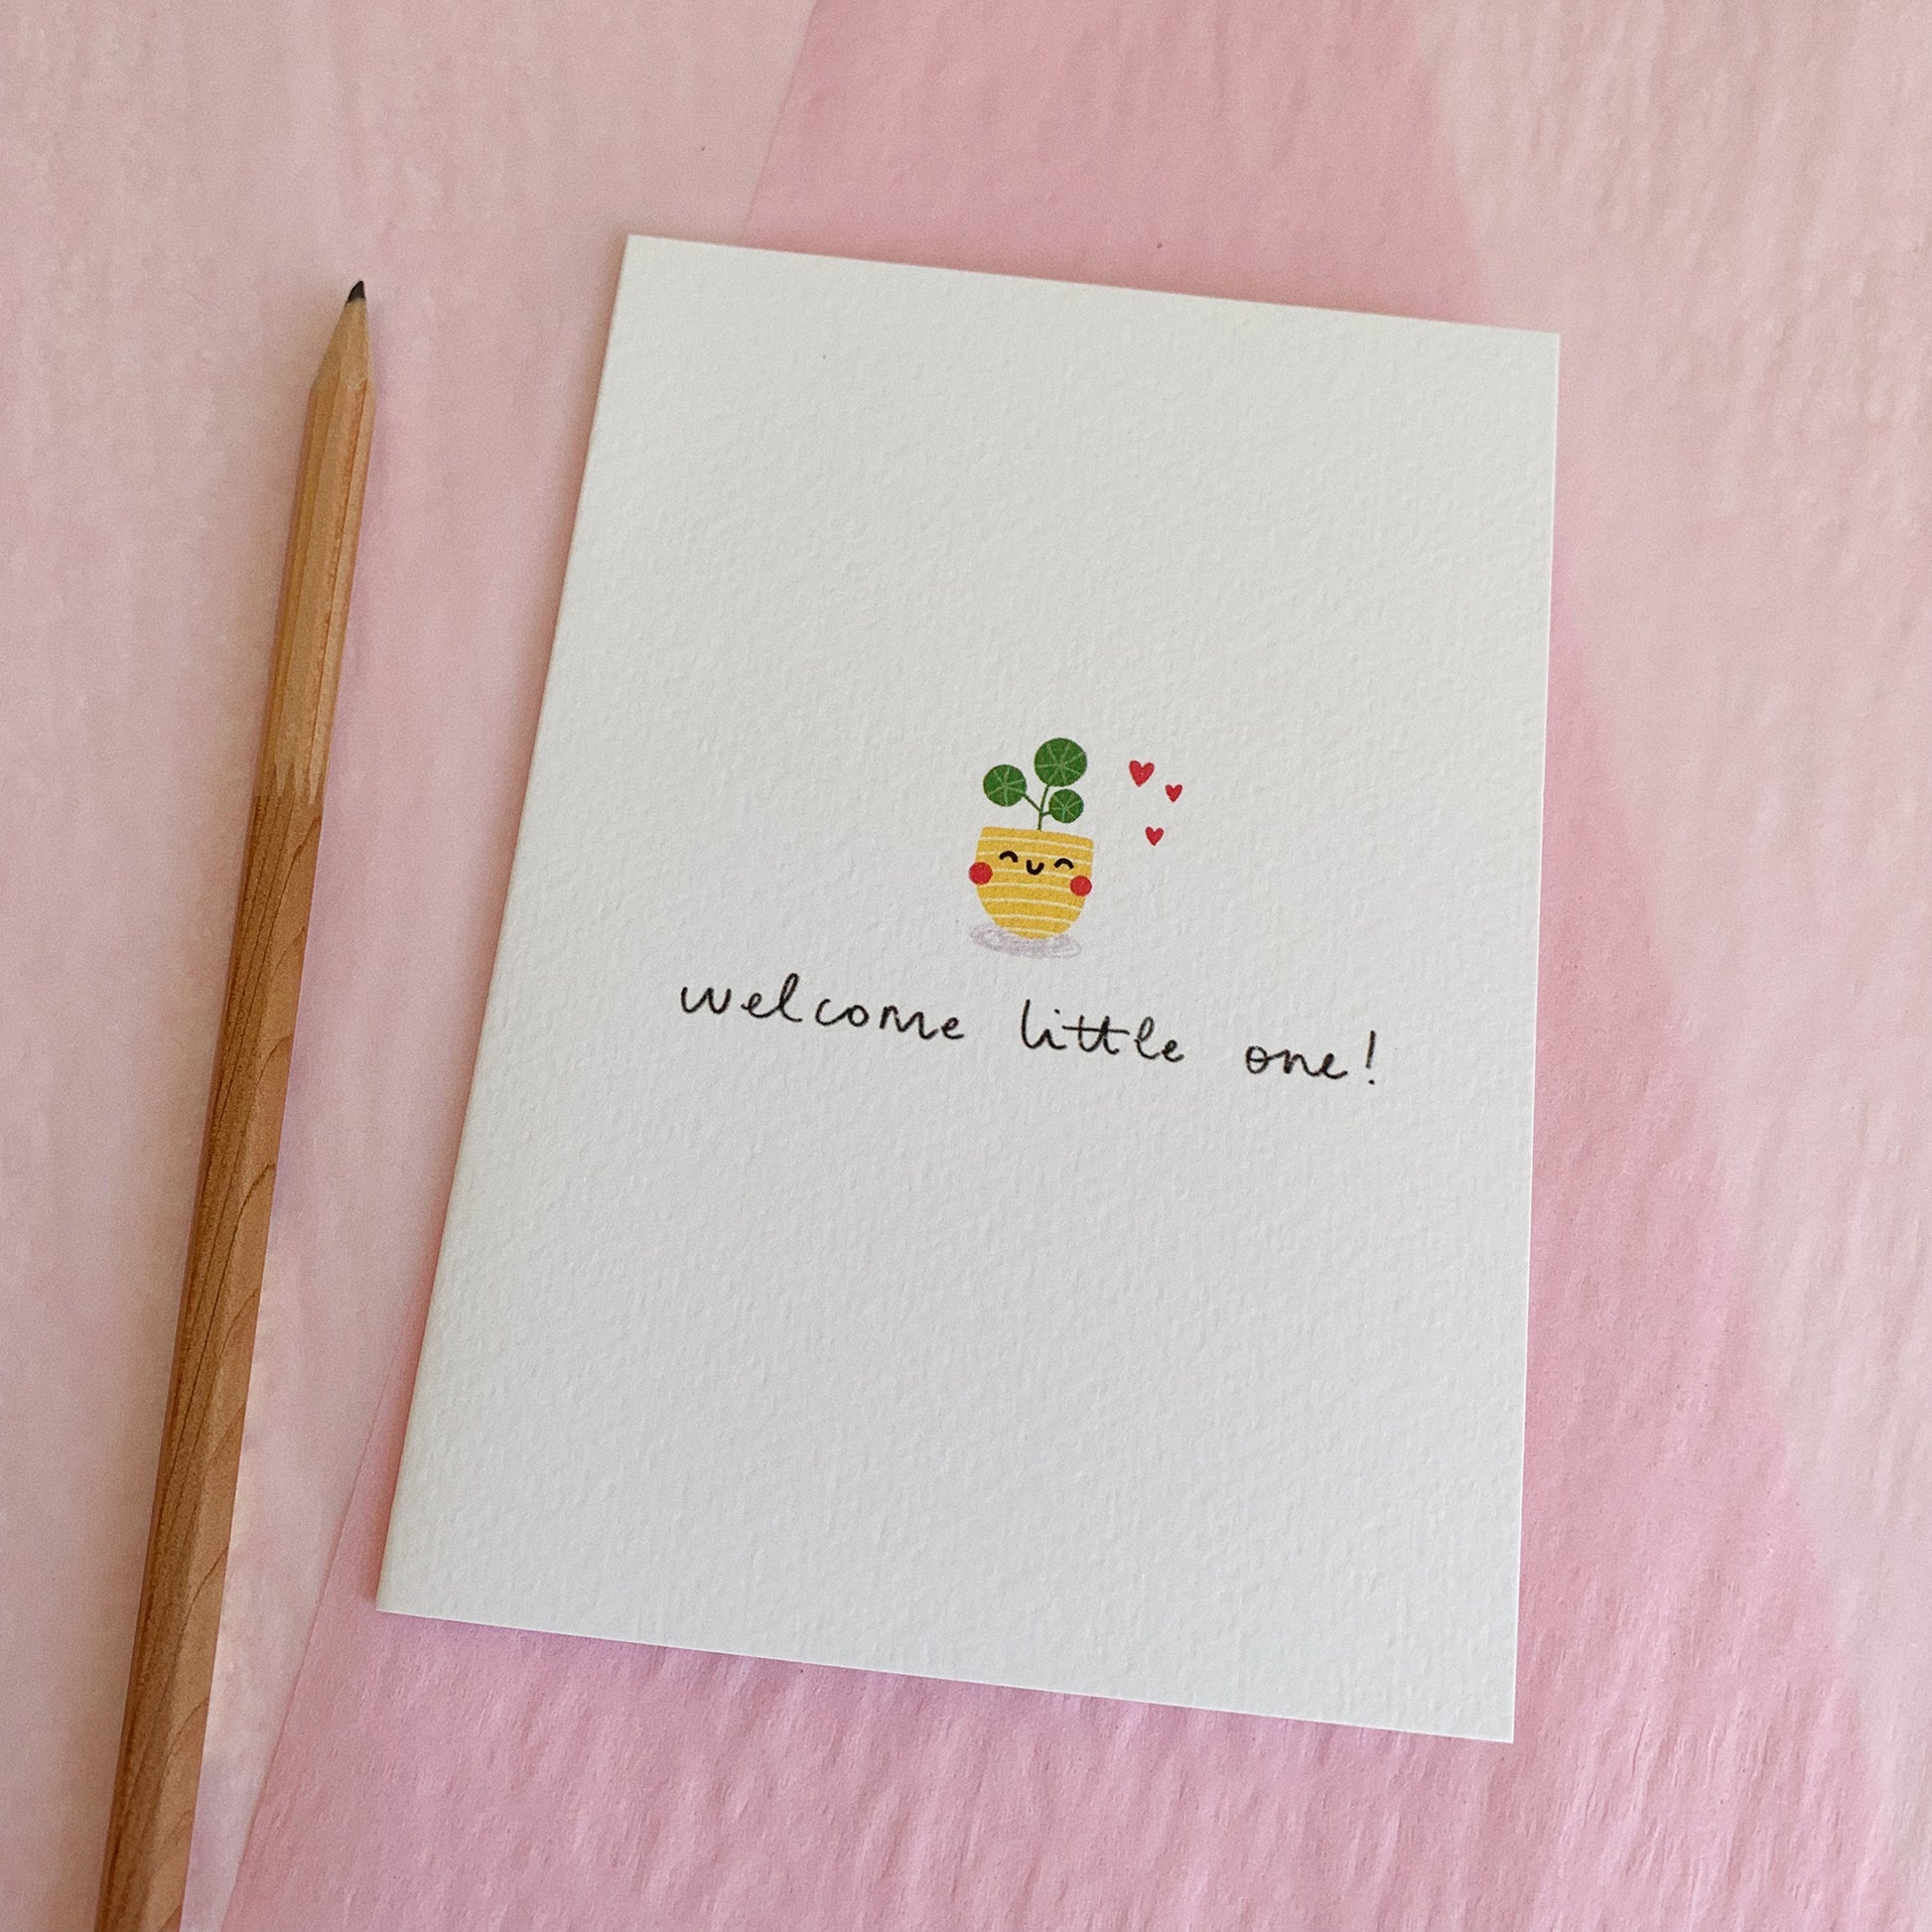 An A6 illustrated card featuring a small pilea plant in a yellow pot with a smiley face on it. Three hearts sit next to the plant, and it reads “Welcome Little One!” underneath. The card lies on top of pink tissue paper and a pencil has been placed next to the card.